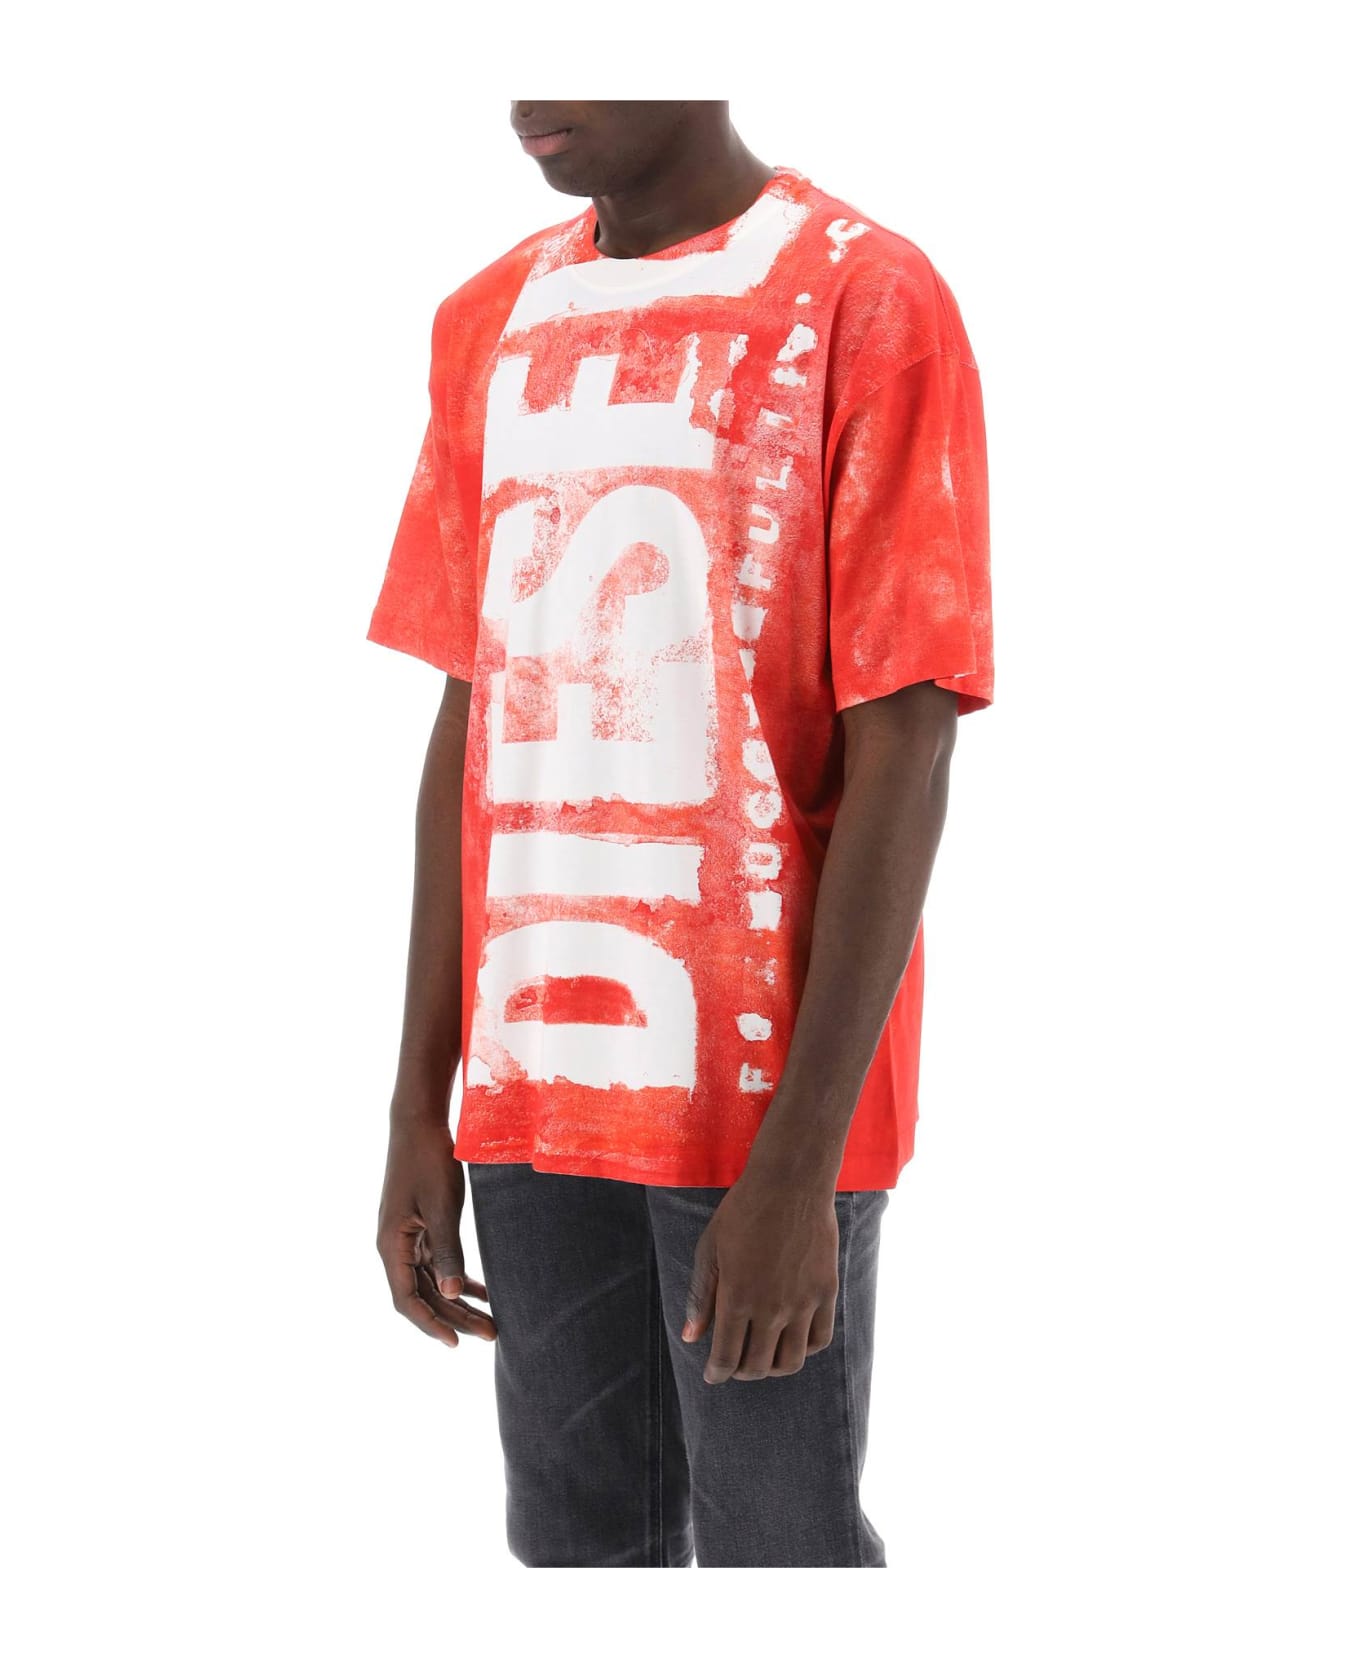 Diesel Printed T-shirt With Oversized Logo - FORMULA RED (Red)